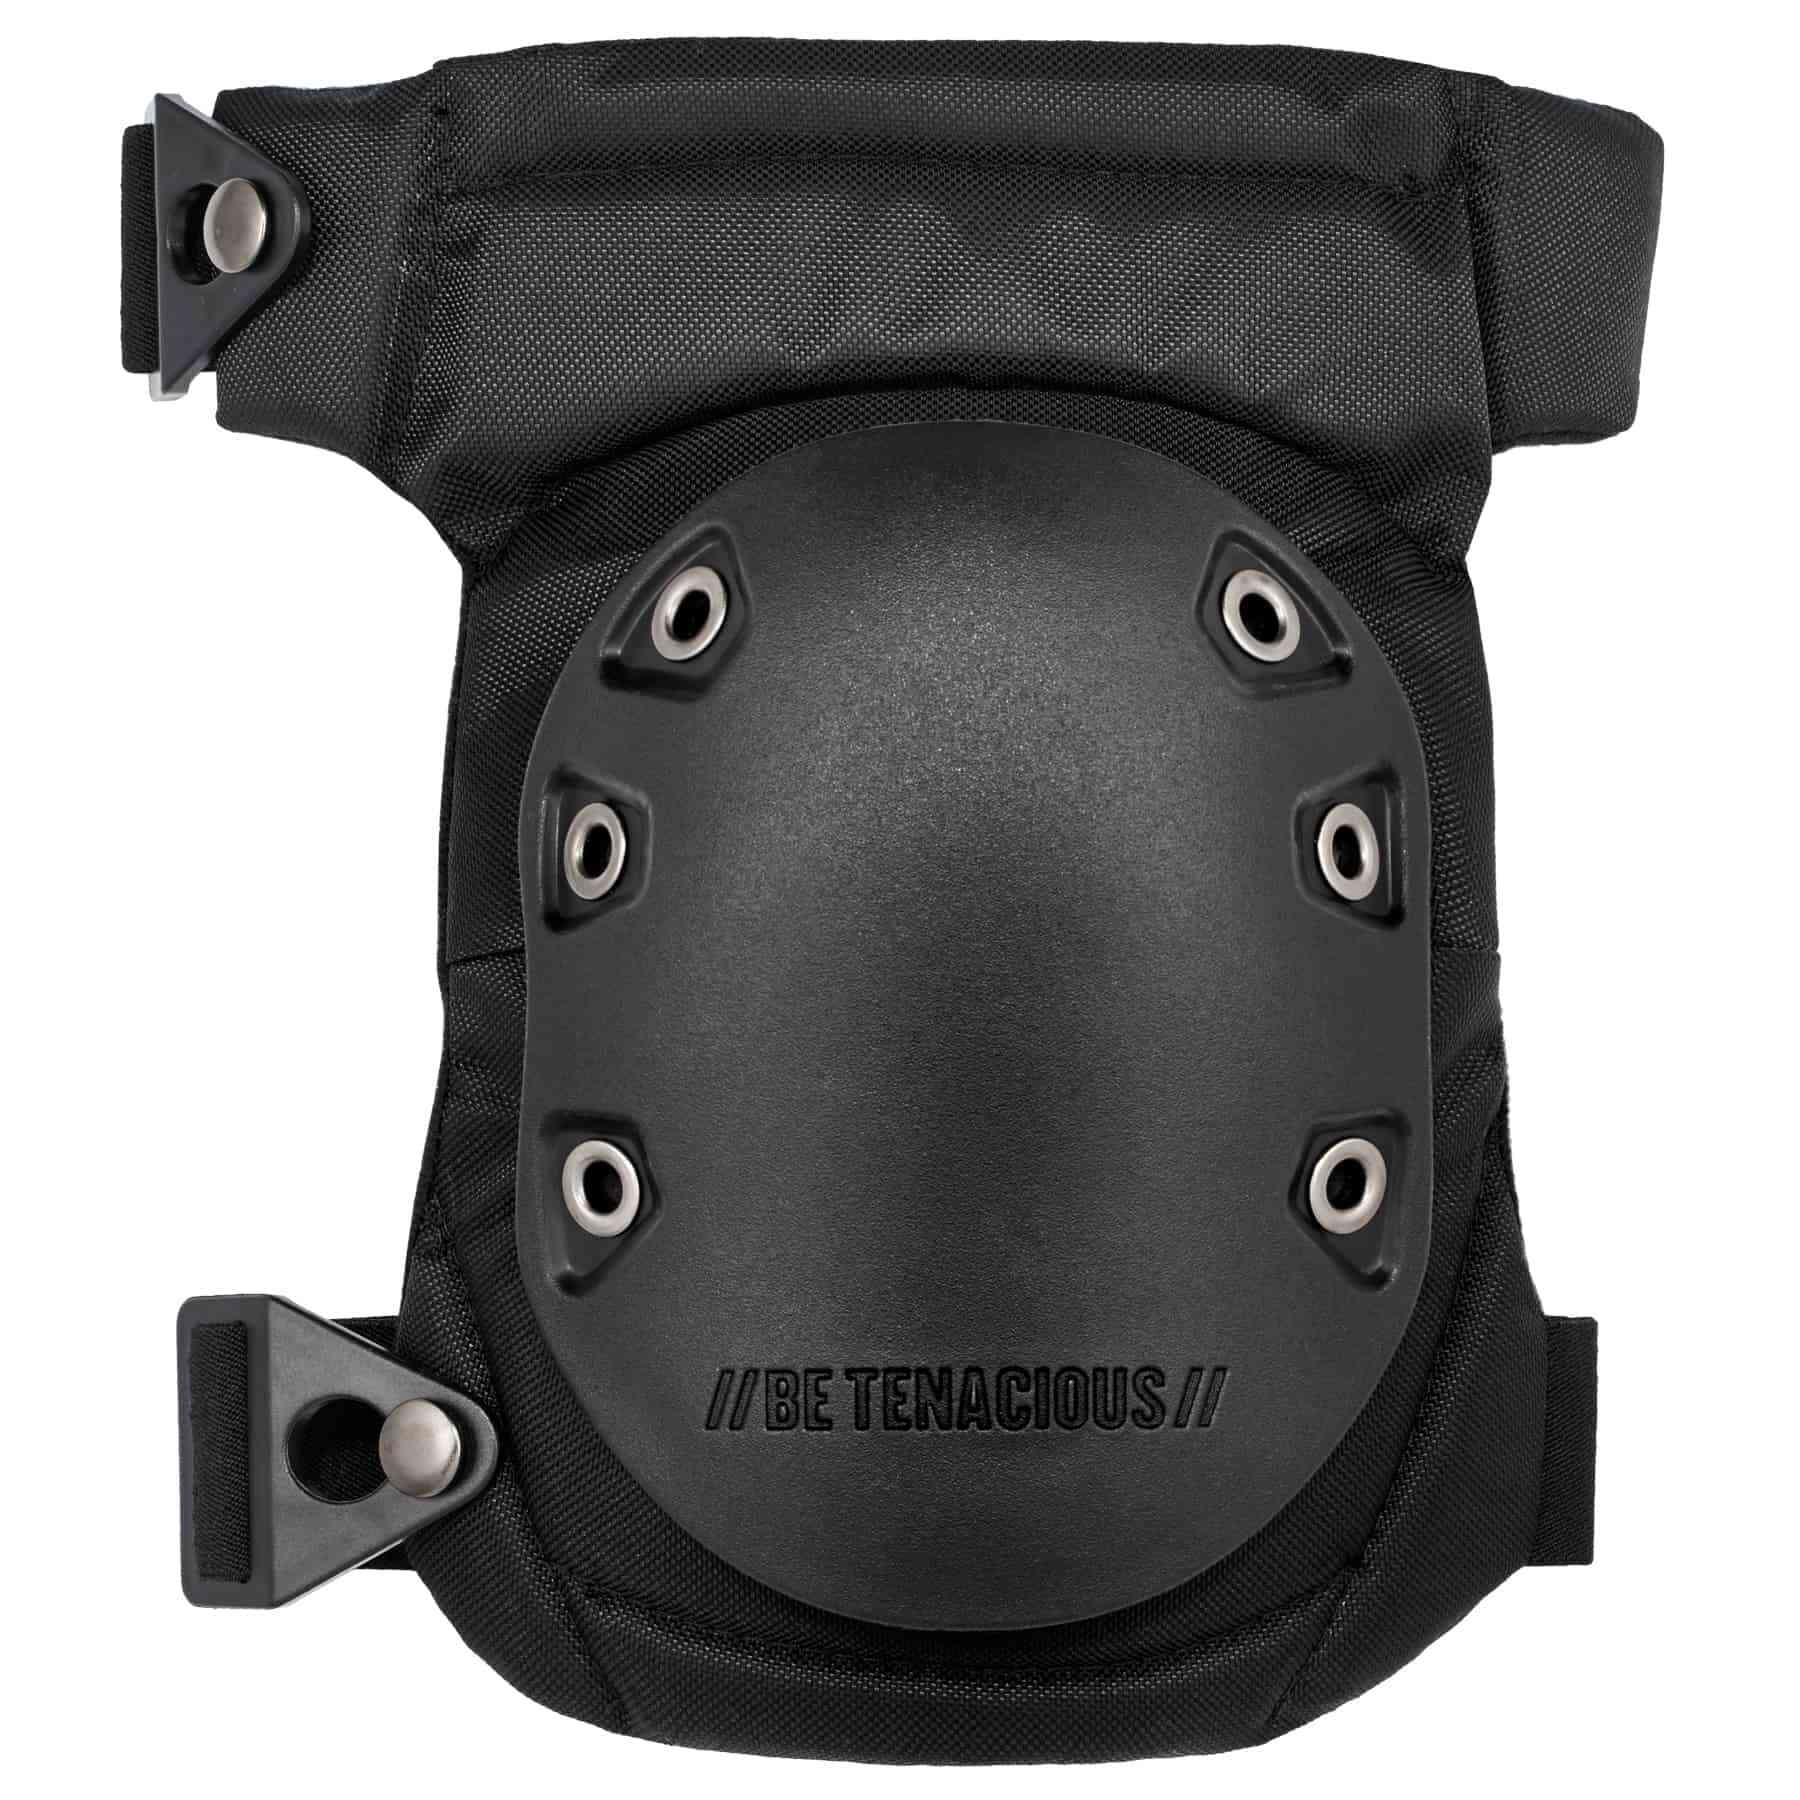 Worktec USA Pro Heavy Duty Comfortable Gel Knee Pads With Double Clips for Work 